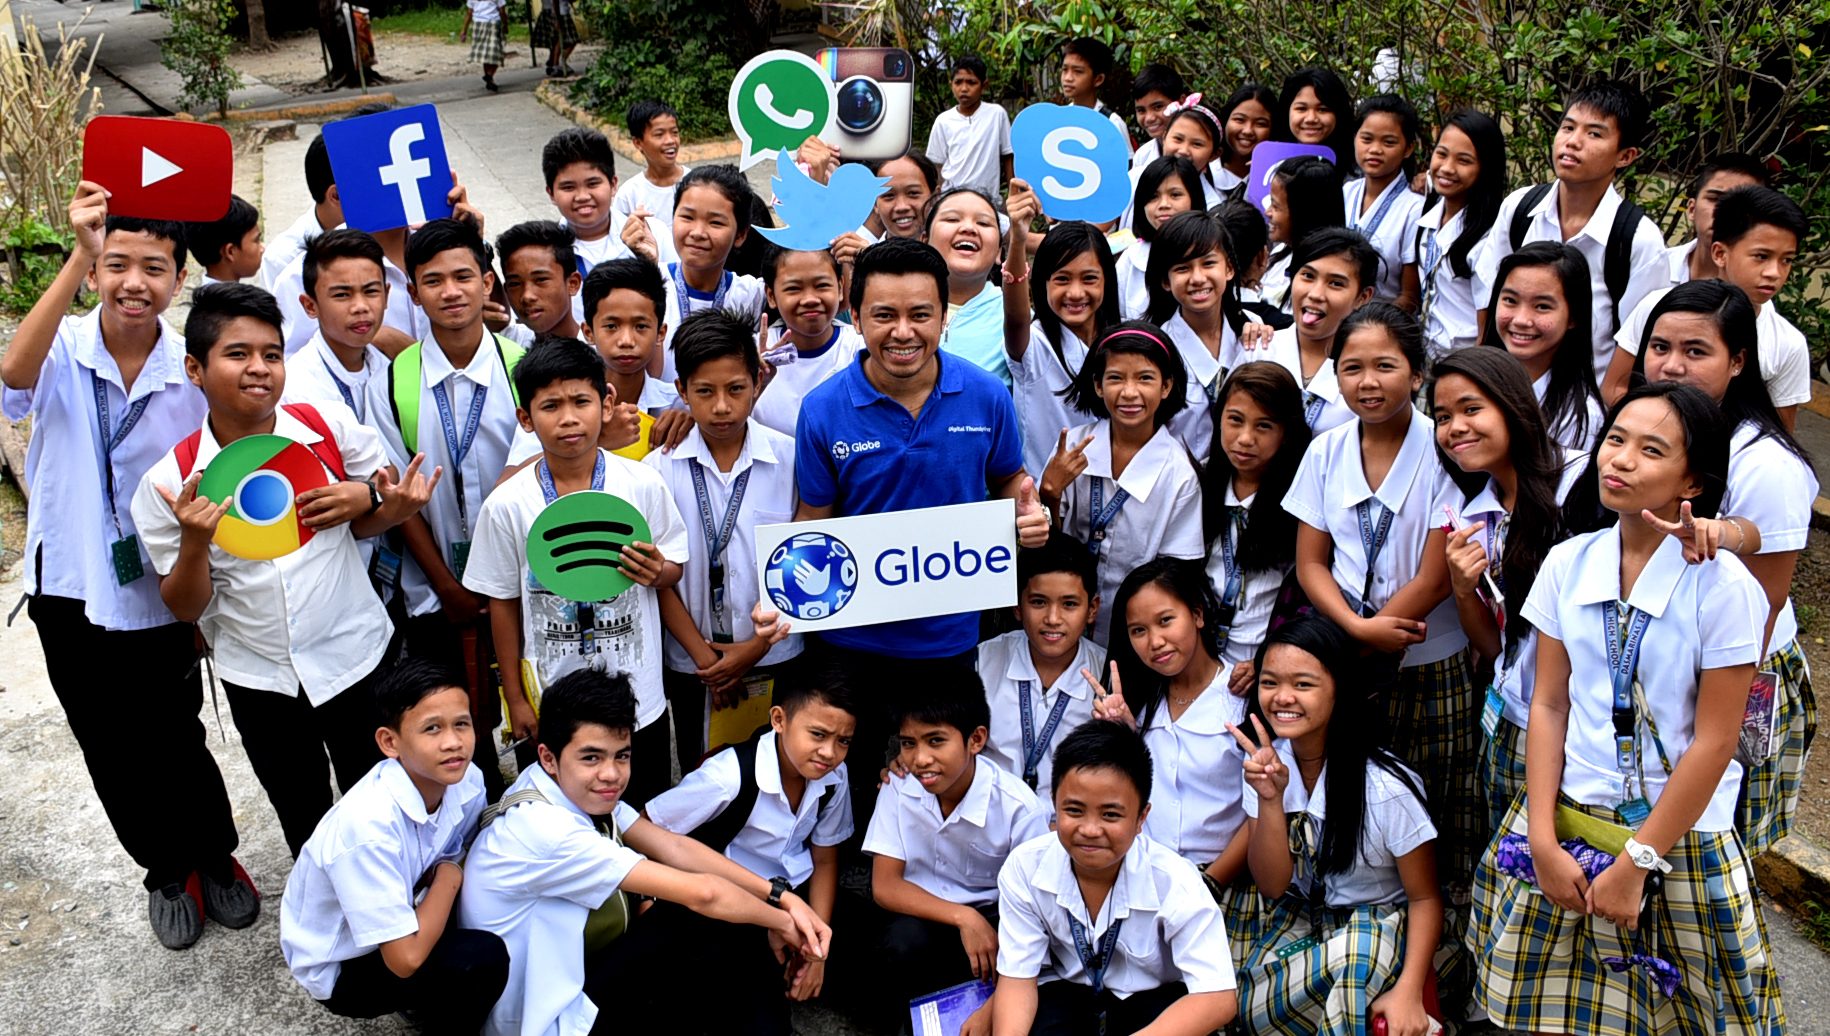 EDUCATION FOR ALL. Digitally-empowered students can become more competitive citizens and leaders. Image courtesy of Globe 